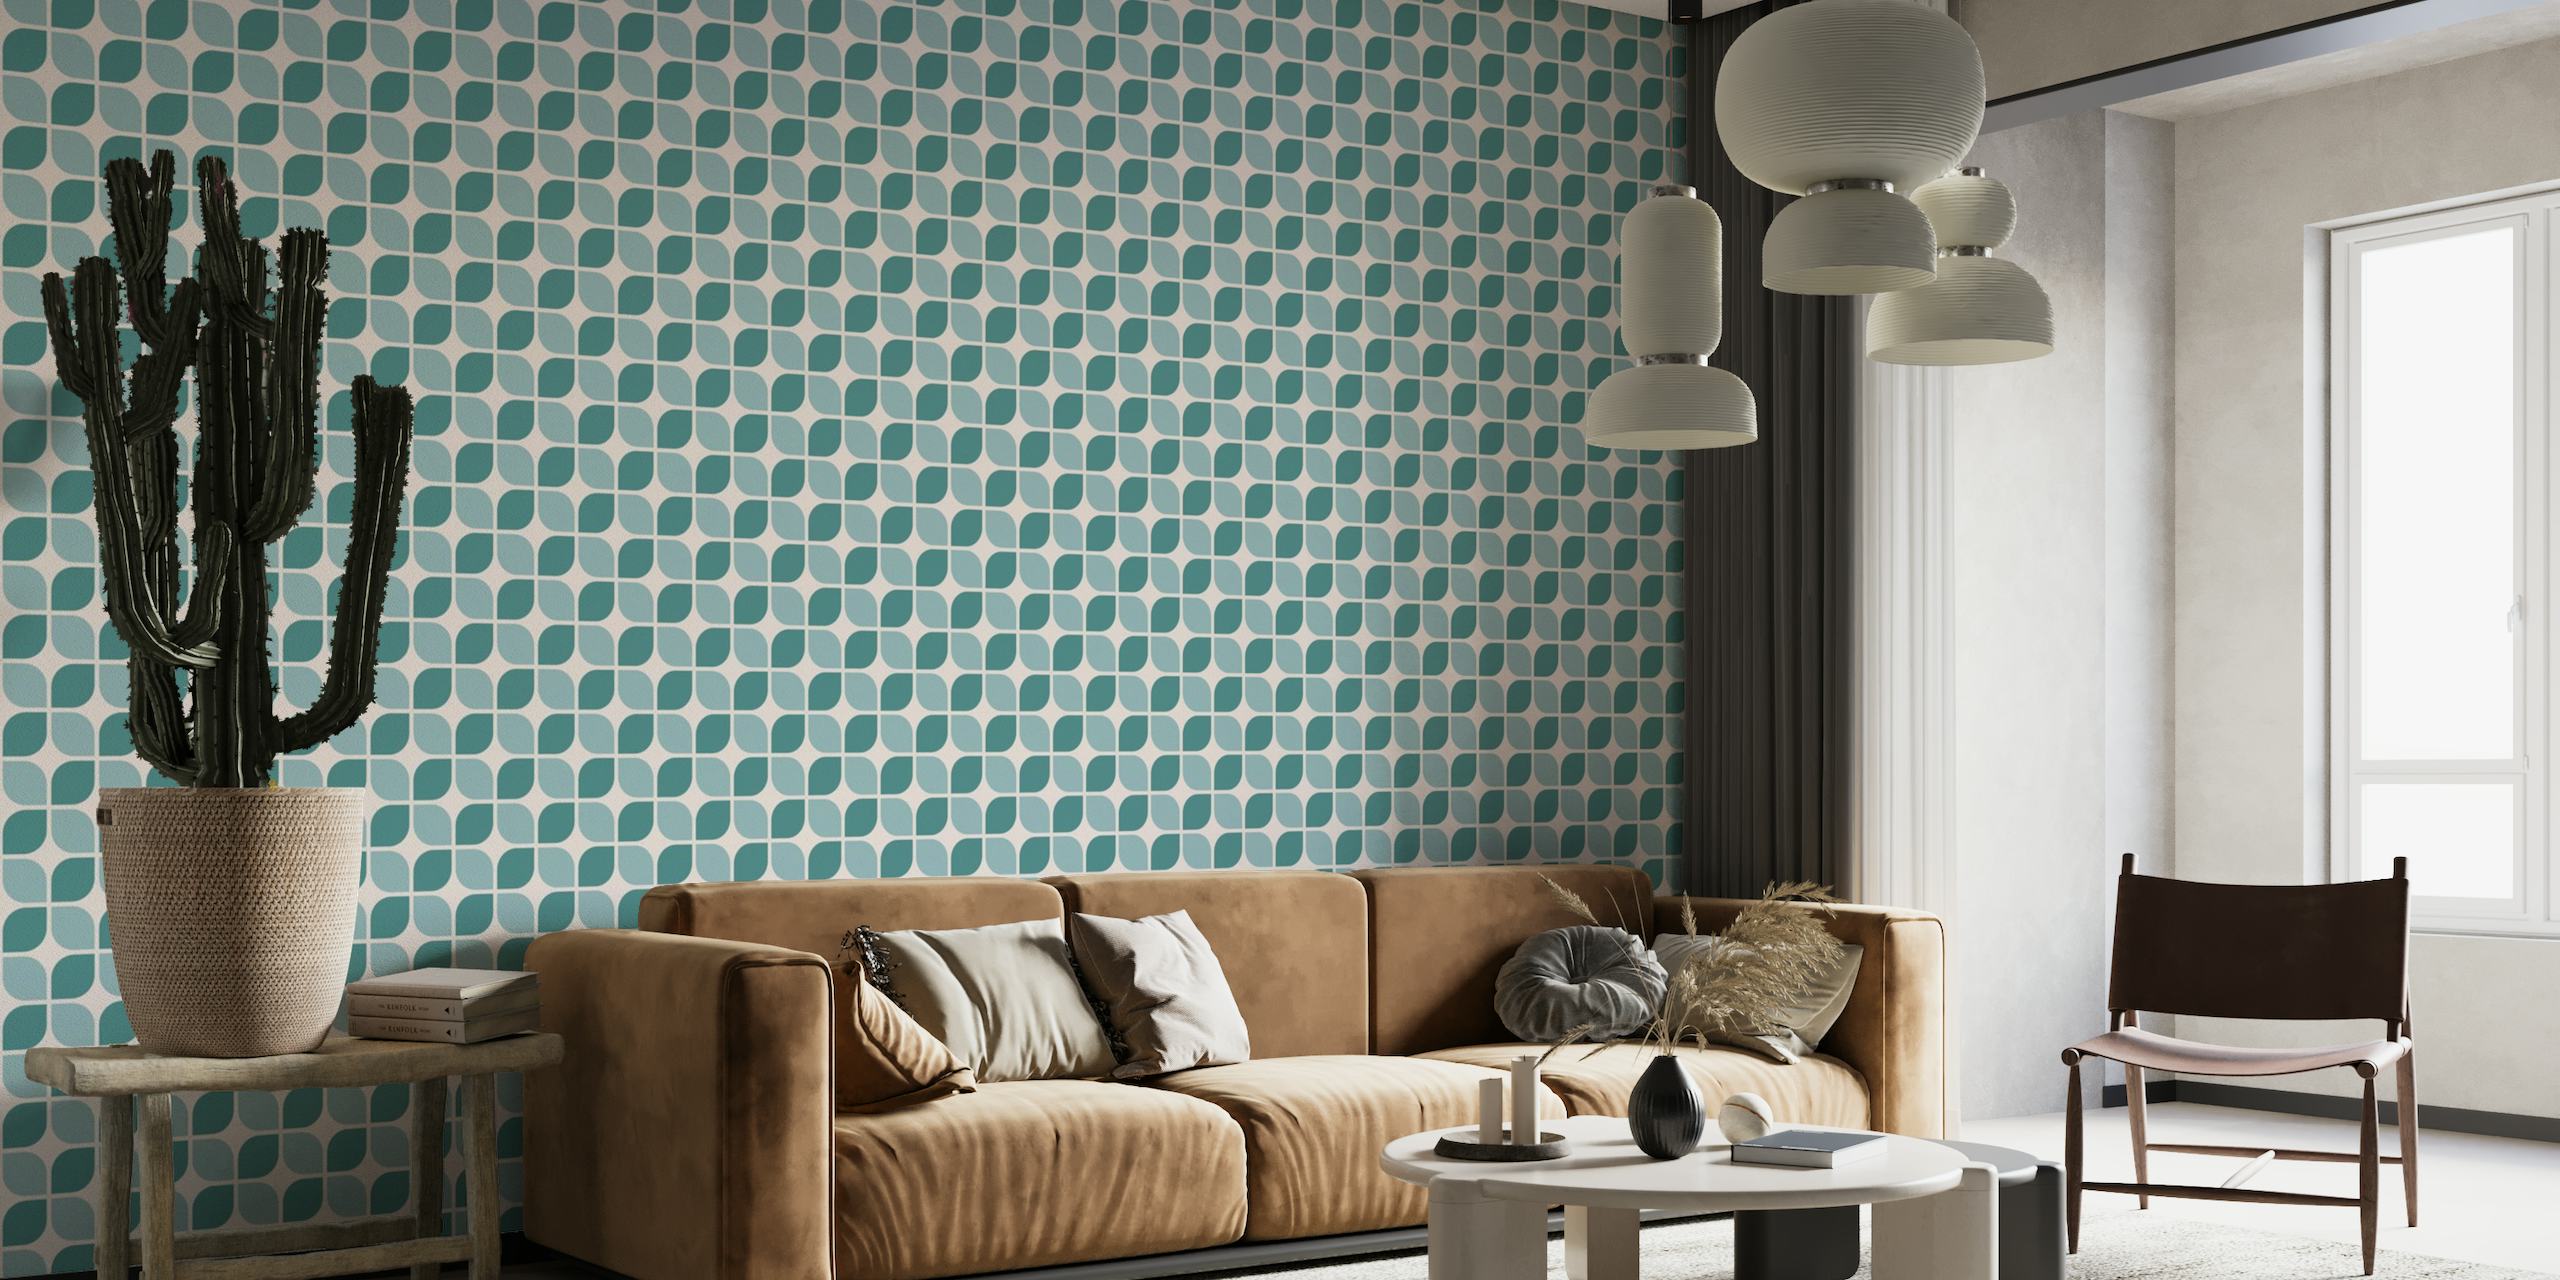 Retro Shapes Pattern Teal Turquoise ταπετσαρία